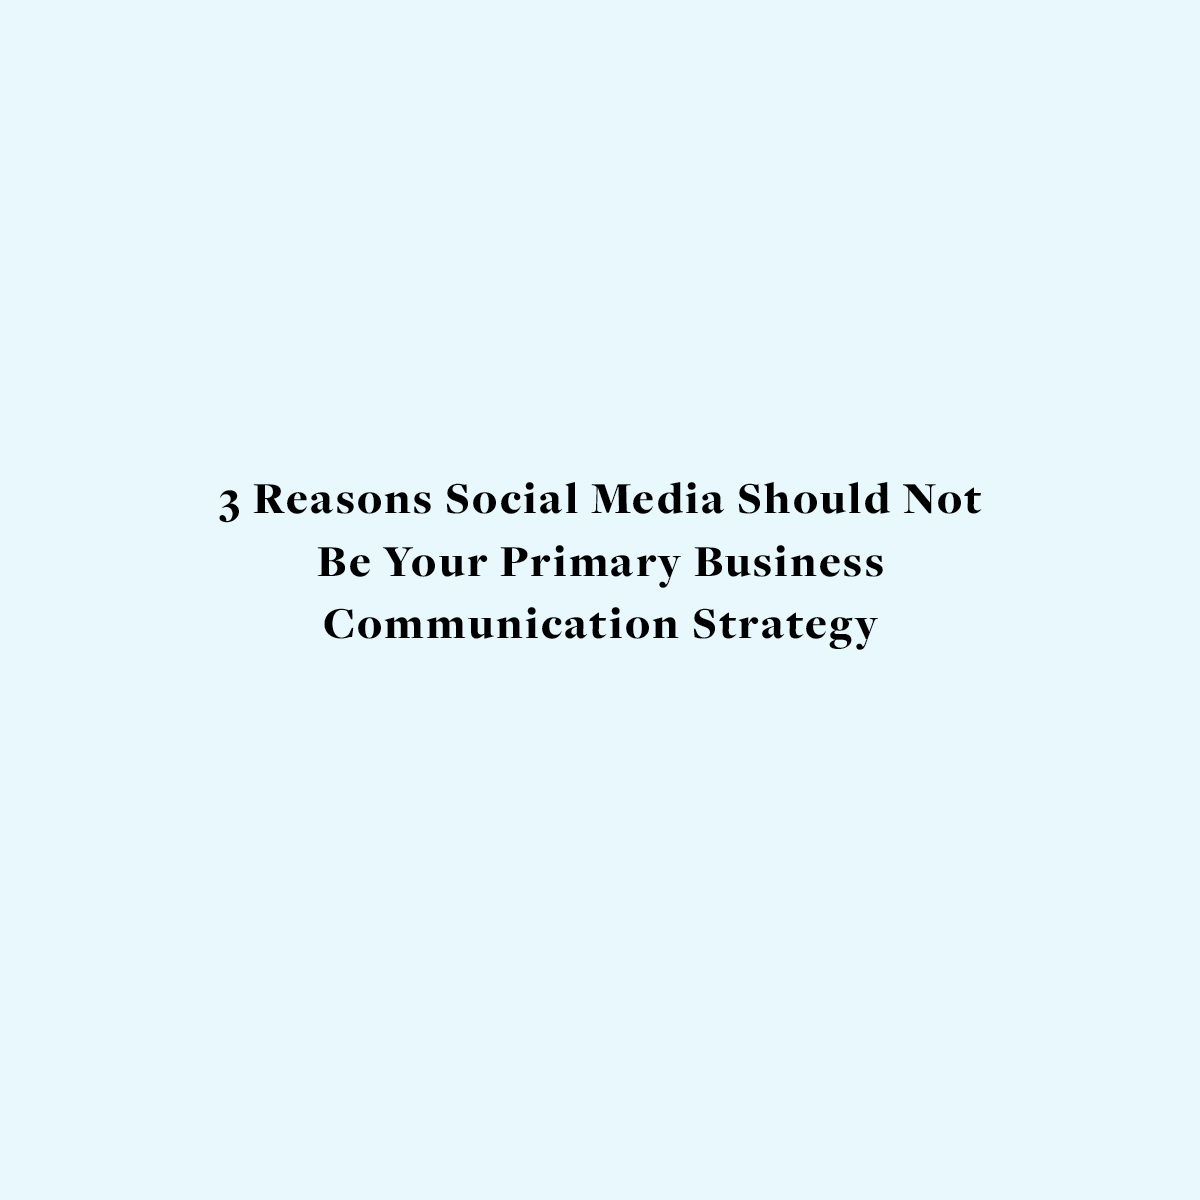 3 Reasons Social Media Should Not Be Your Primary Business Communication Strategy